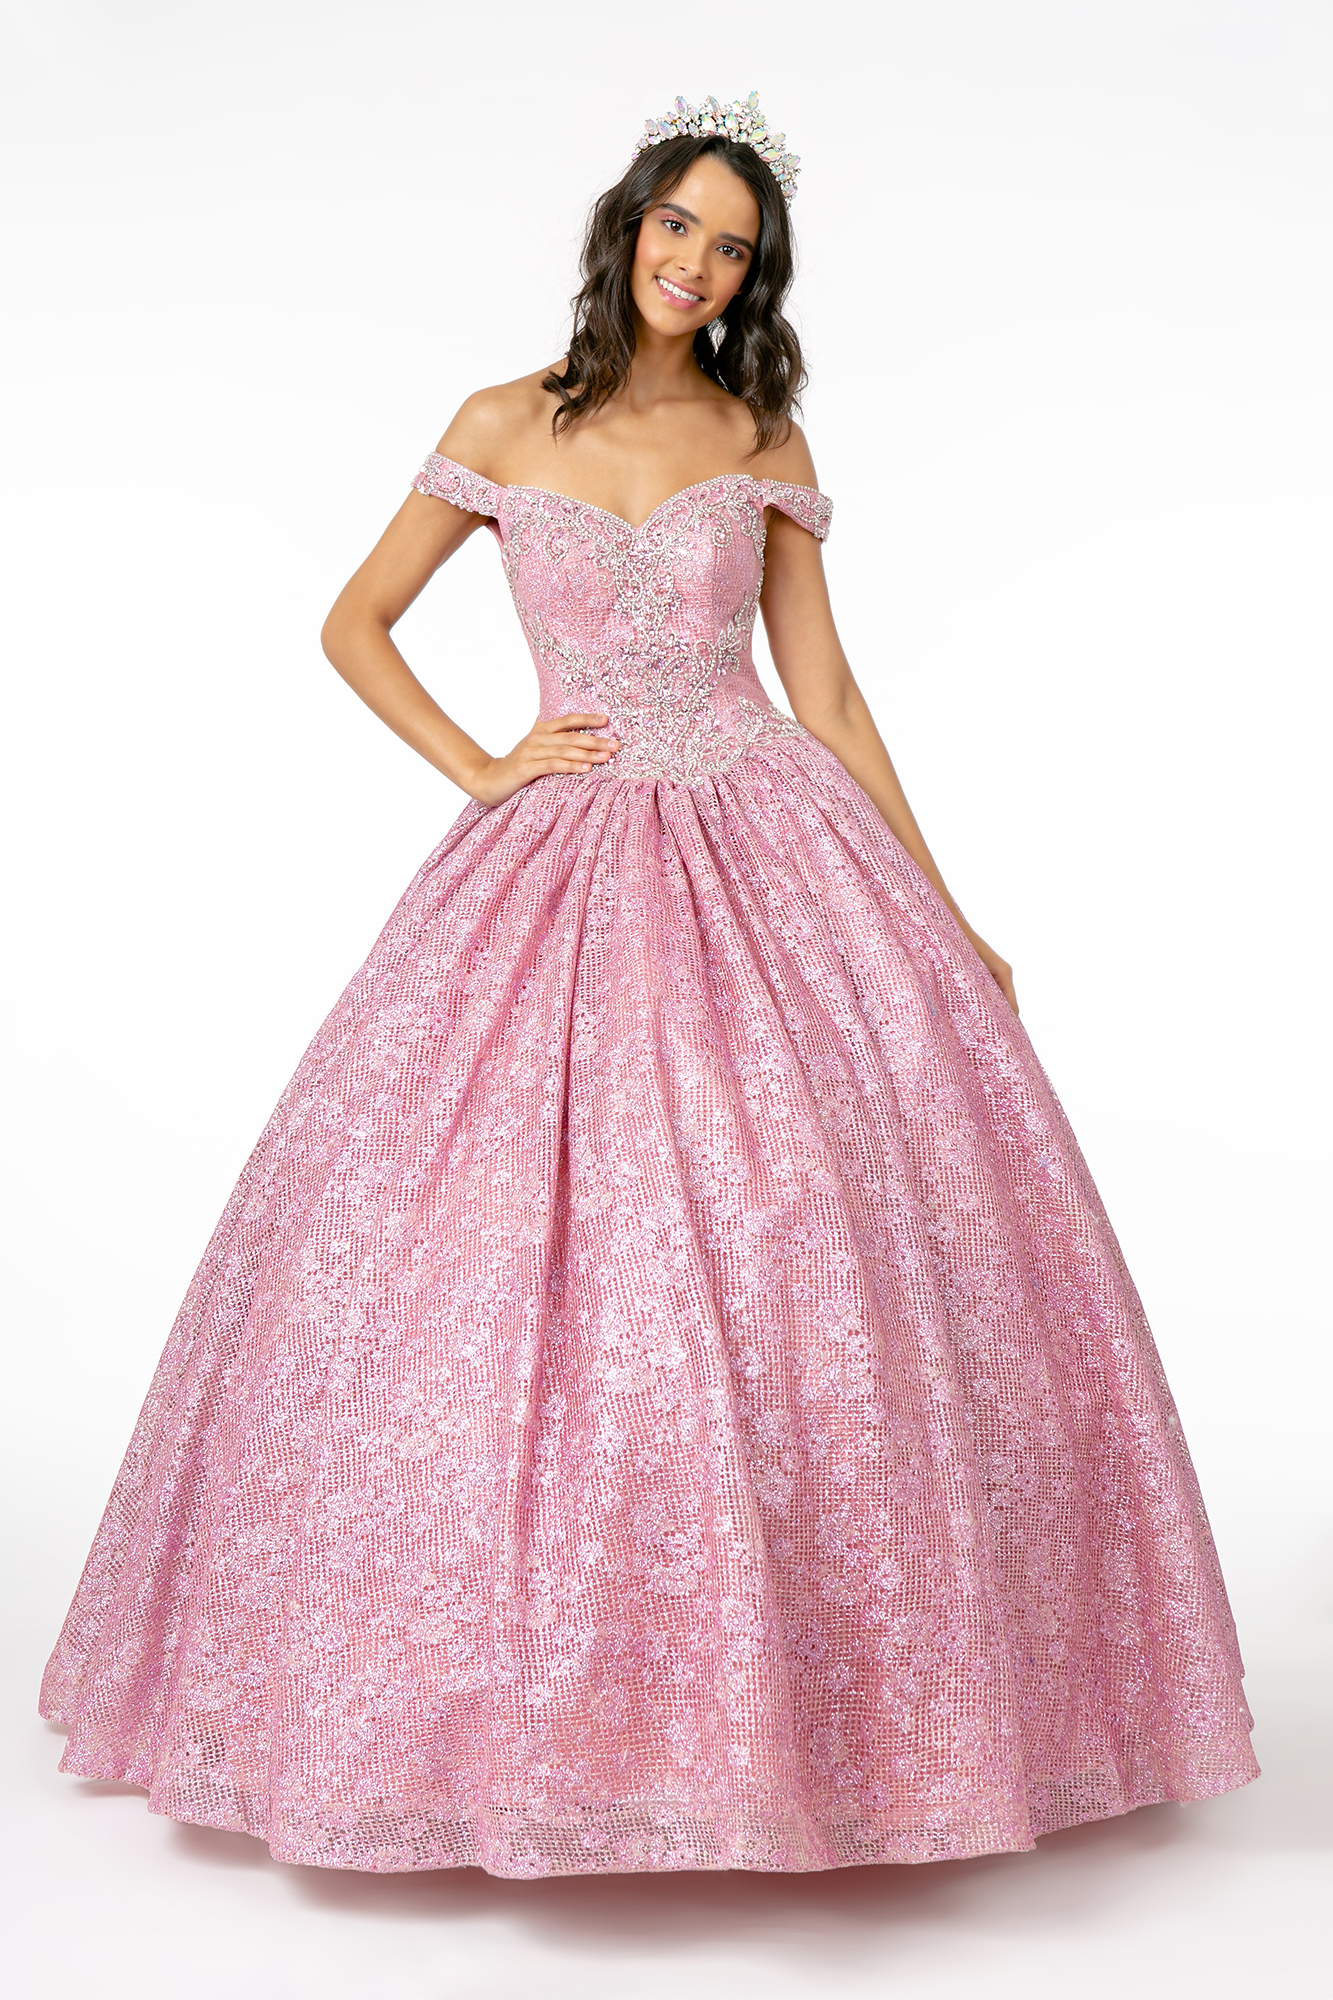 Dress for a Quinceanera: 13 Stunning Quince Dresses